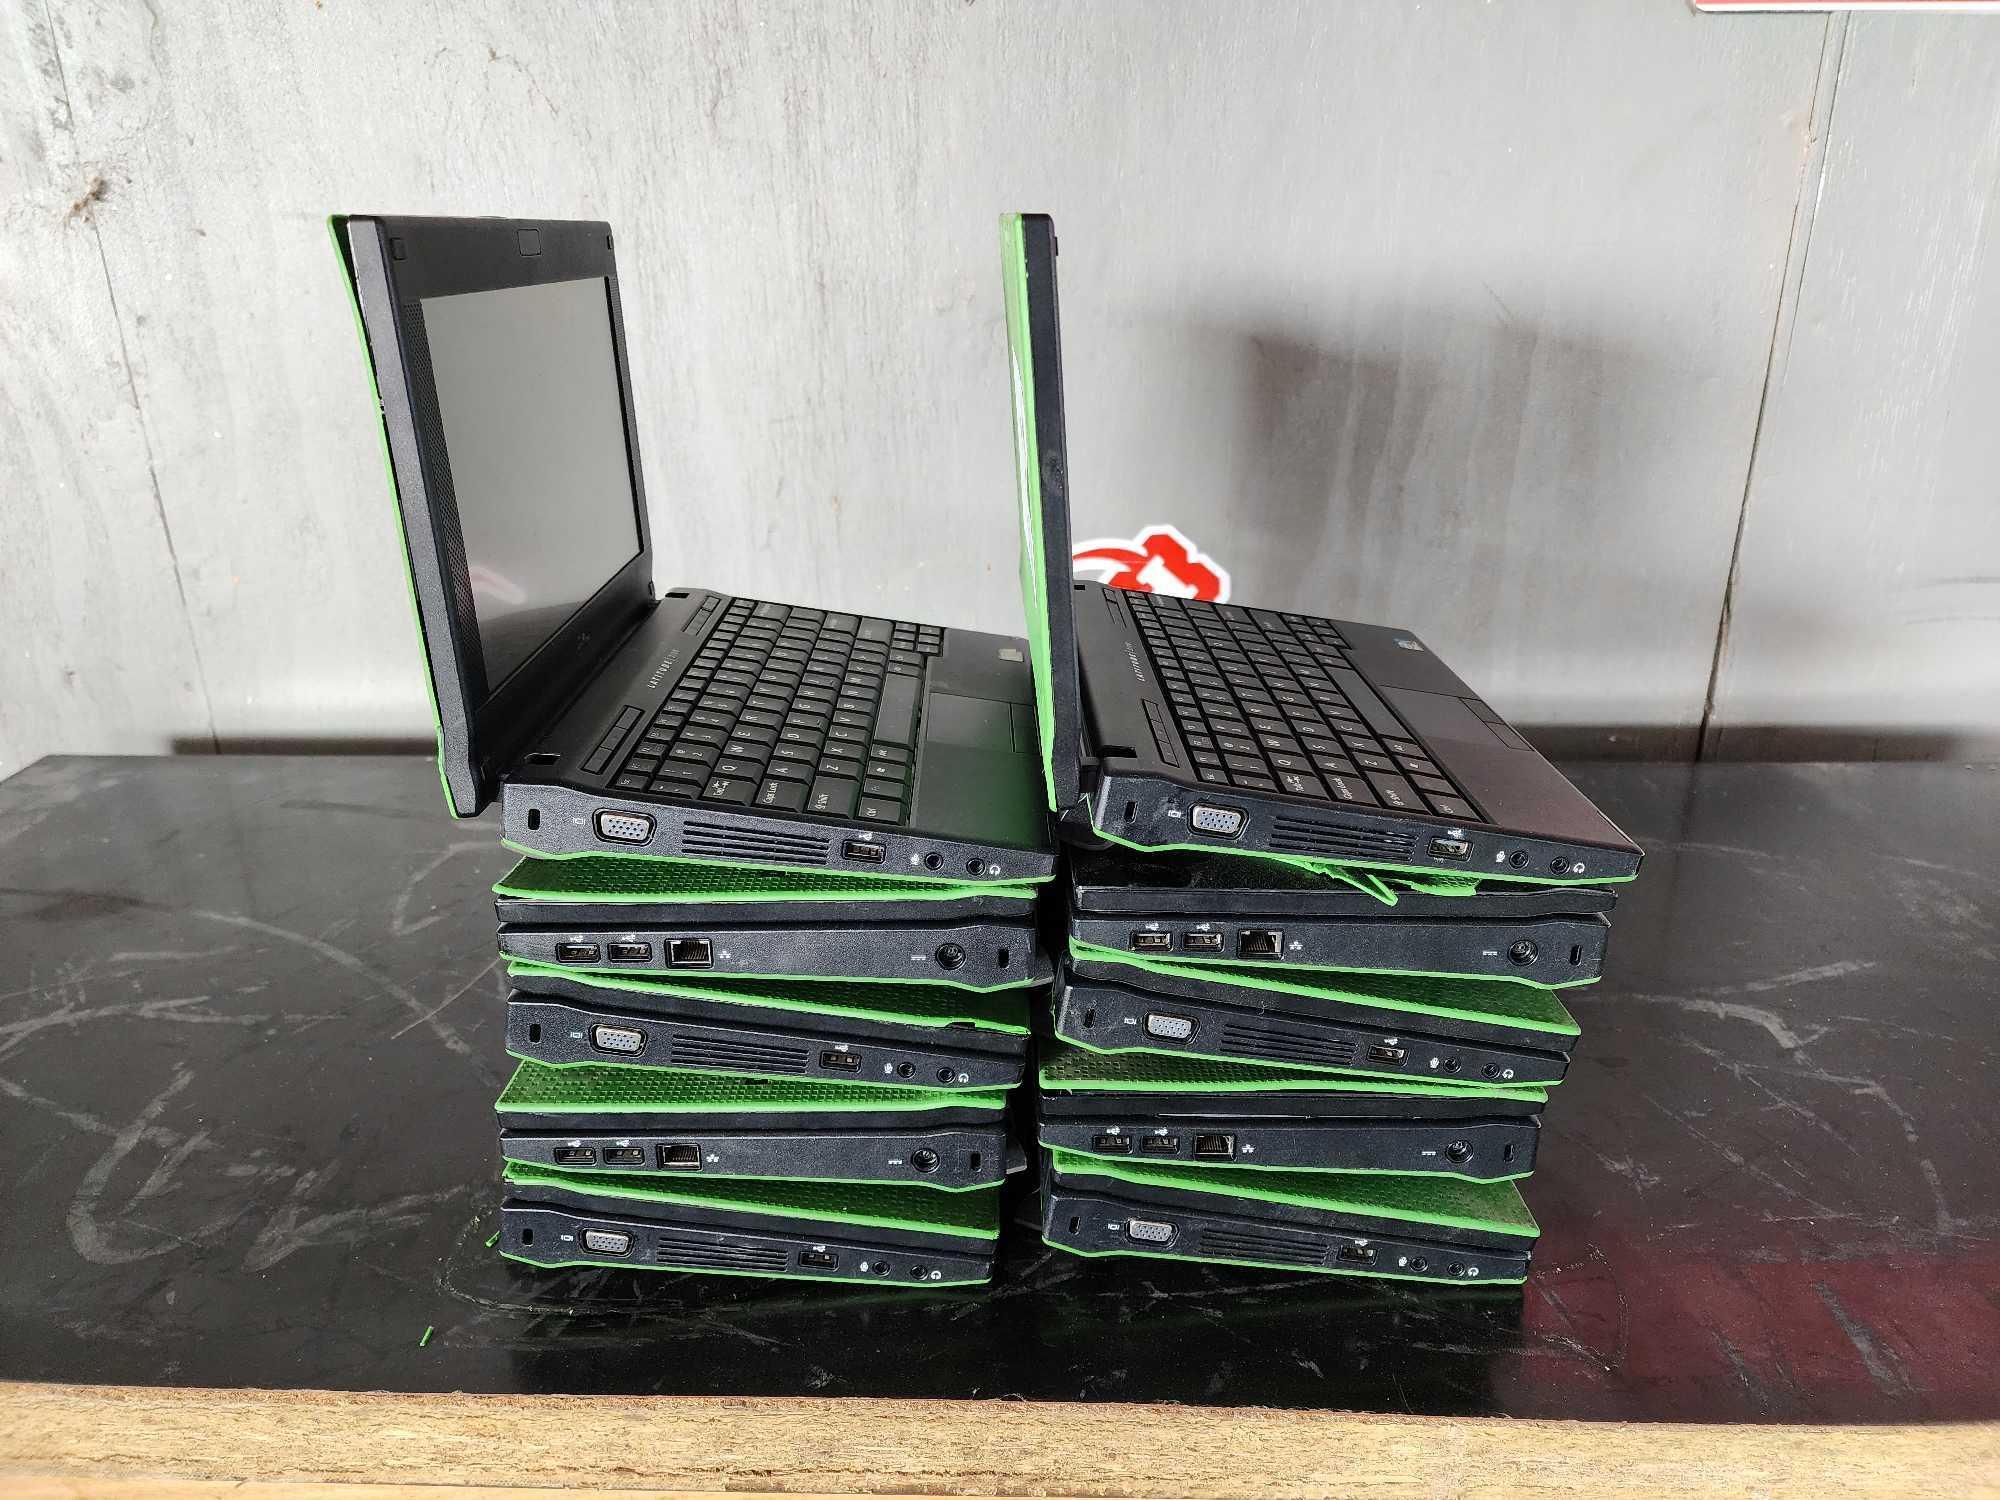 Group of (10) Dell Latitude 2100 Laptops